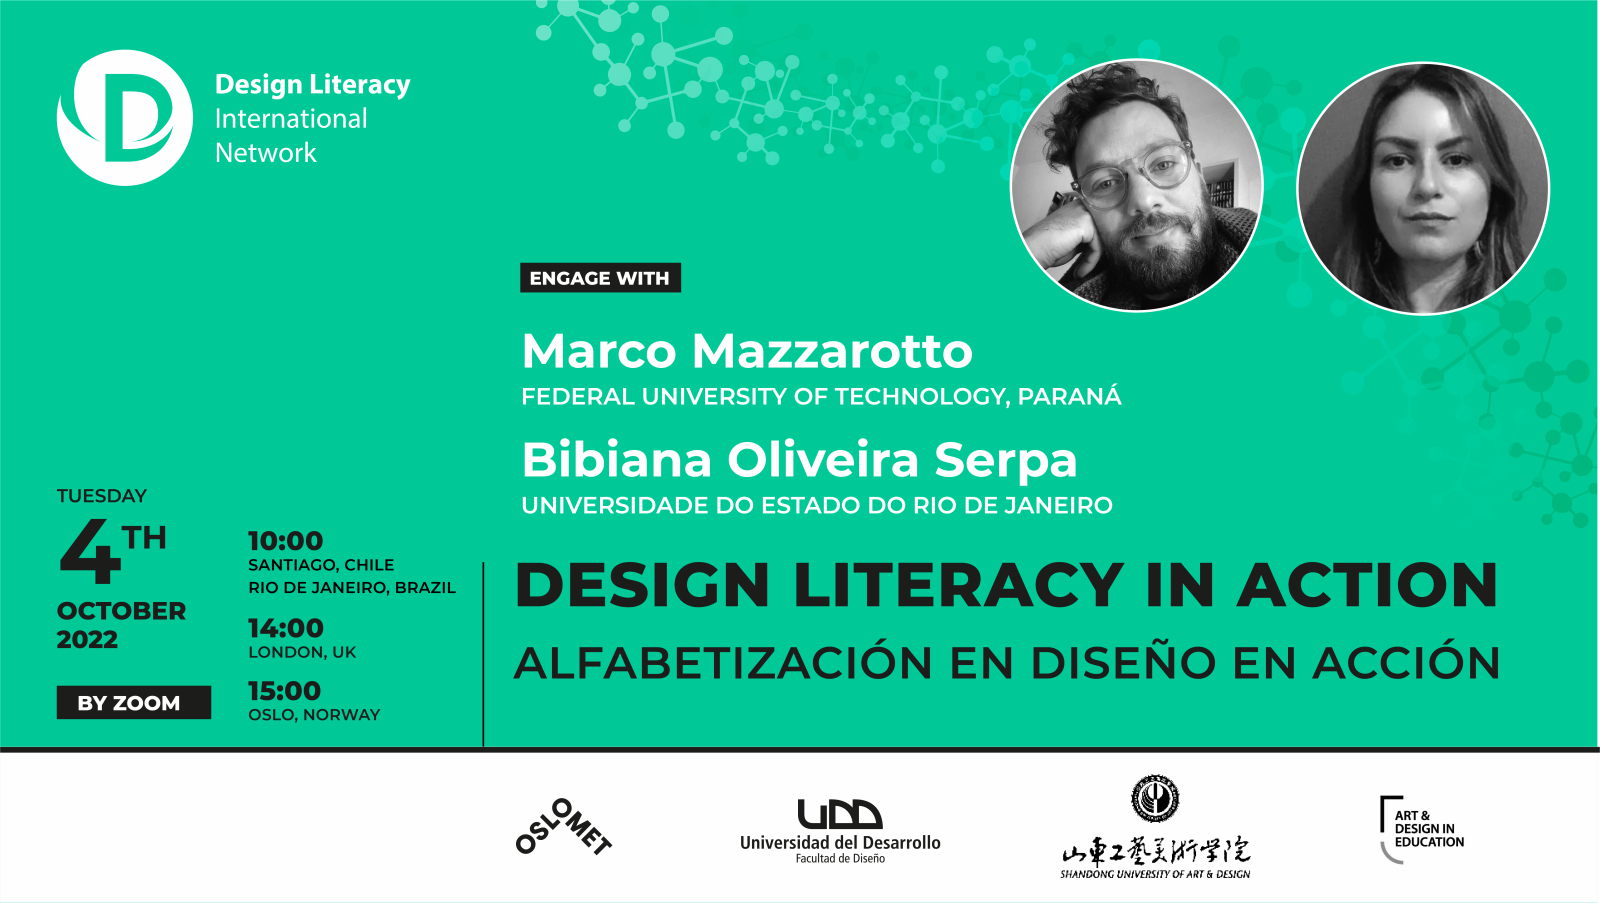 Engage with Marco Mazzarotto & Bibiana Oliveira Serpa | Design Literacy in Action | Design Literacy International Network event